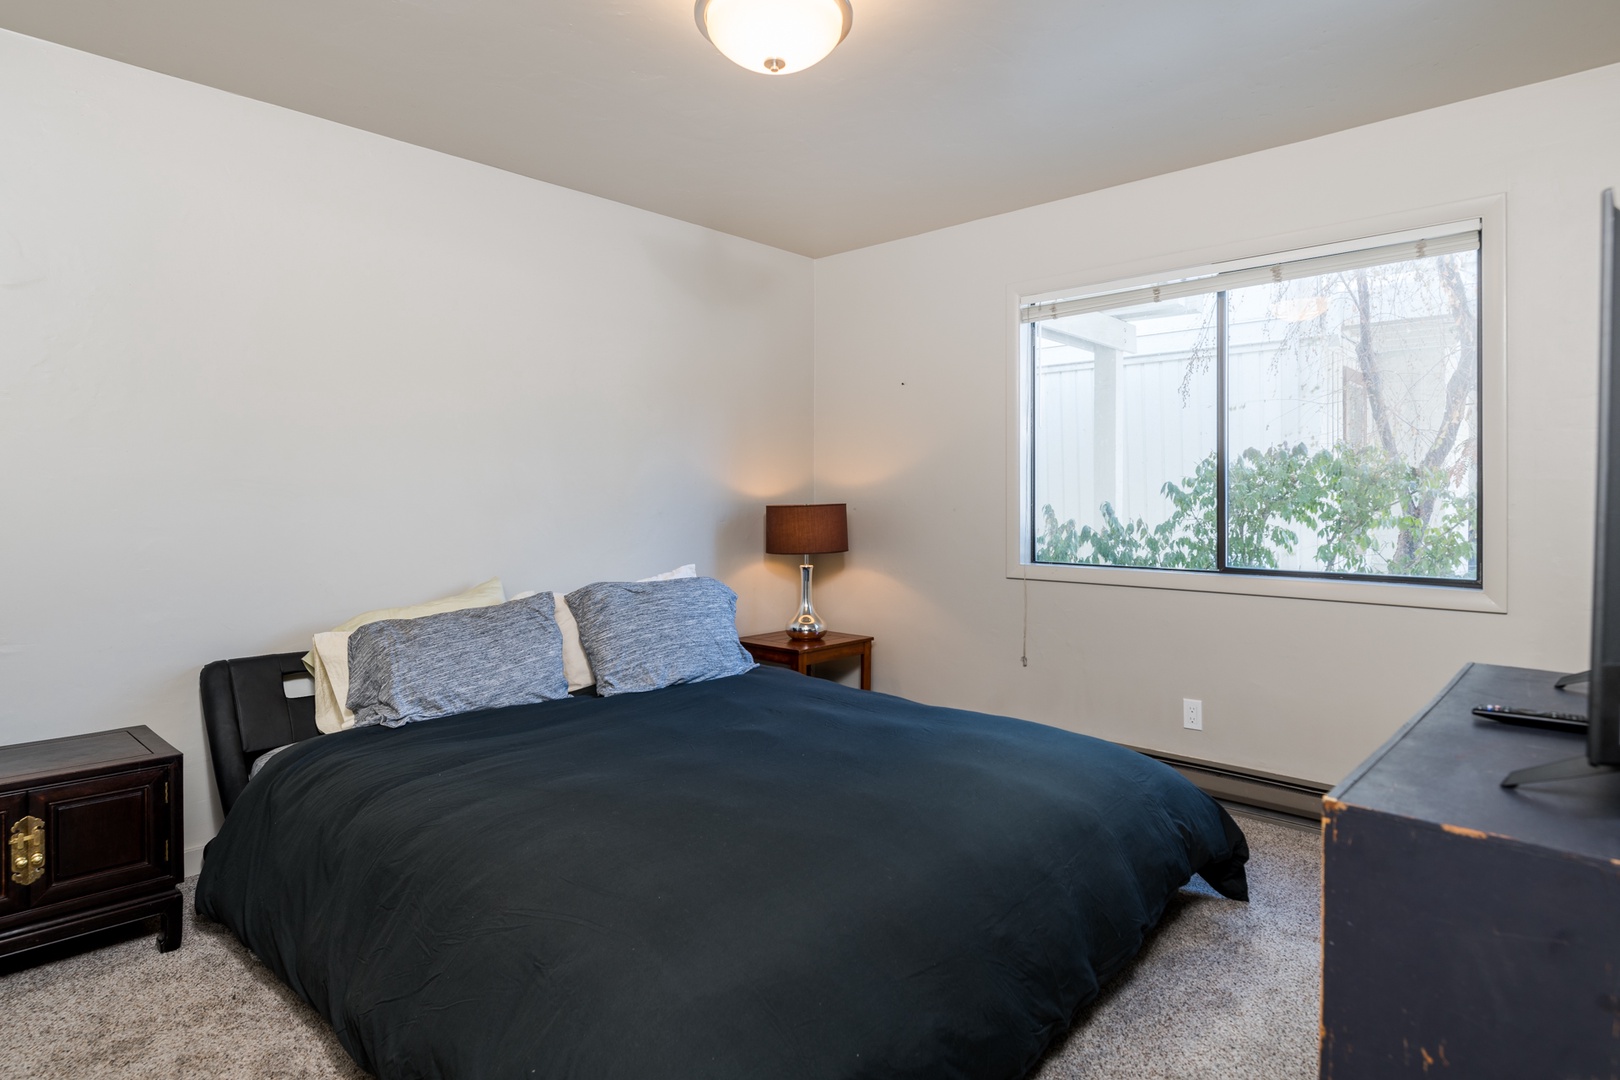 Ketchum Vacation Rentals, Town & Slopes - Kind bed in the main bedroom